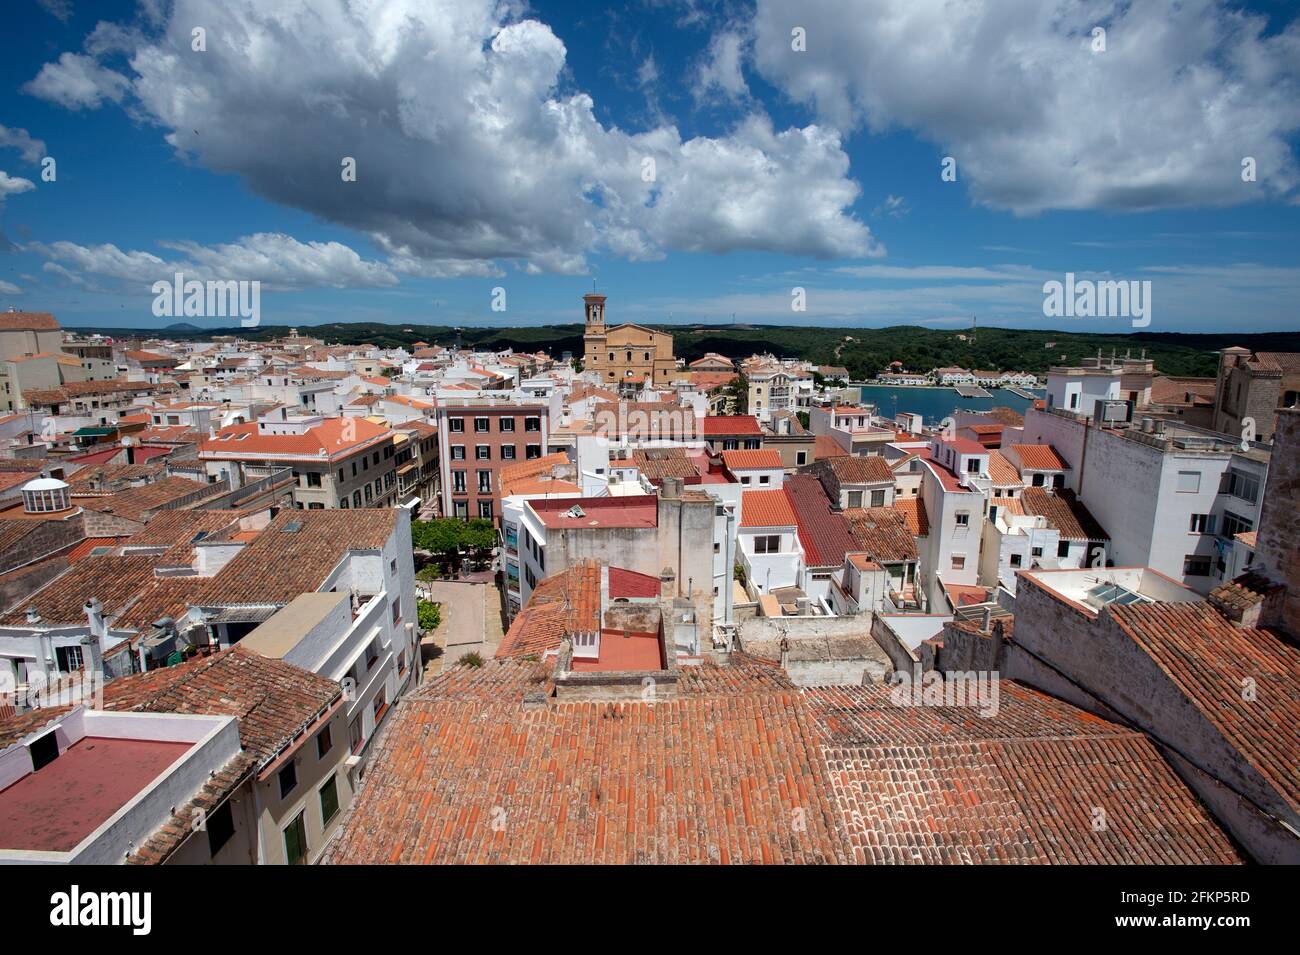 looking across the roof tiles and churches of Mahon town towards Mahon harbour on Menorca Spain Stock Photo